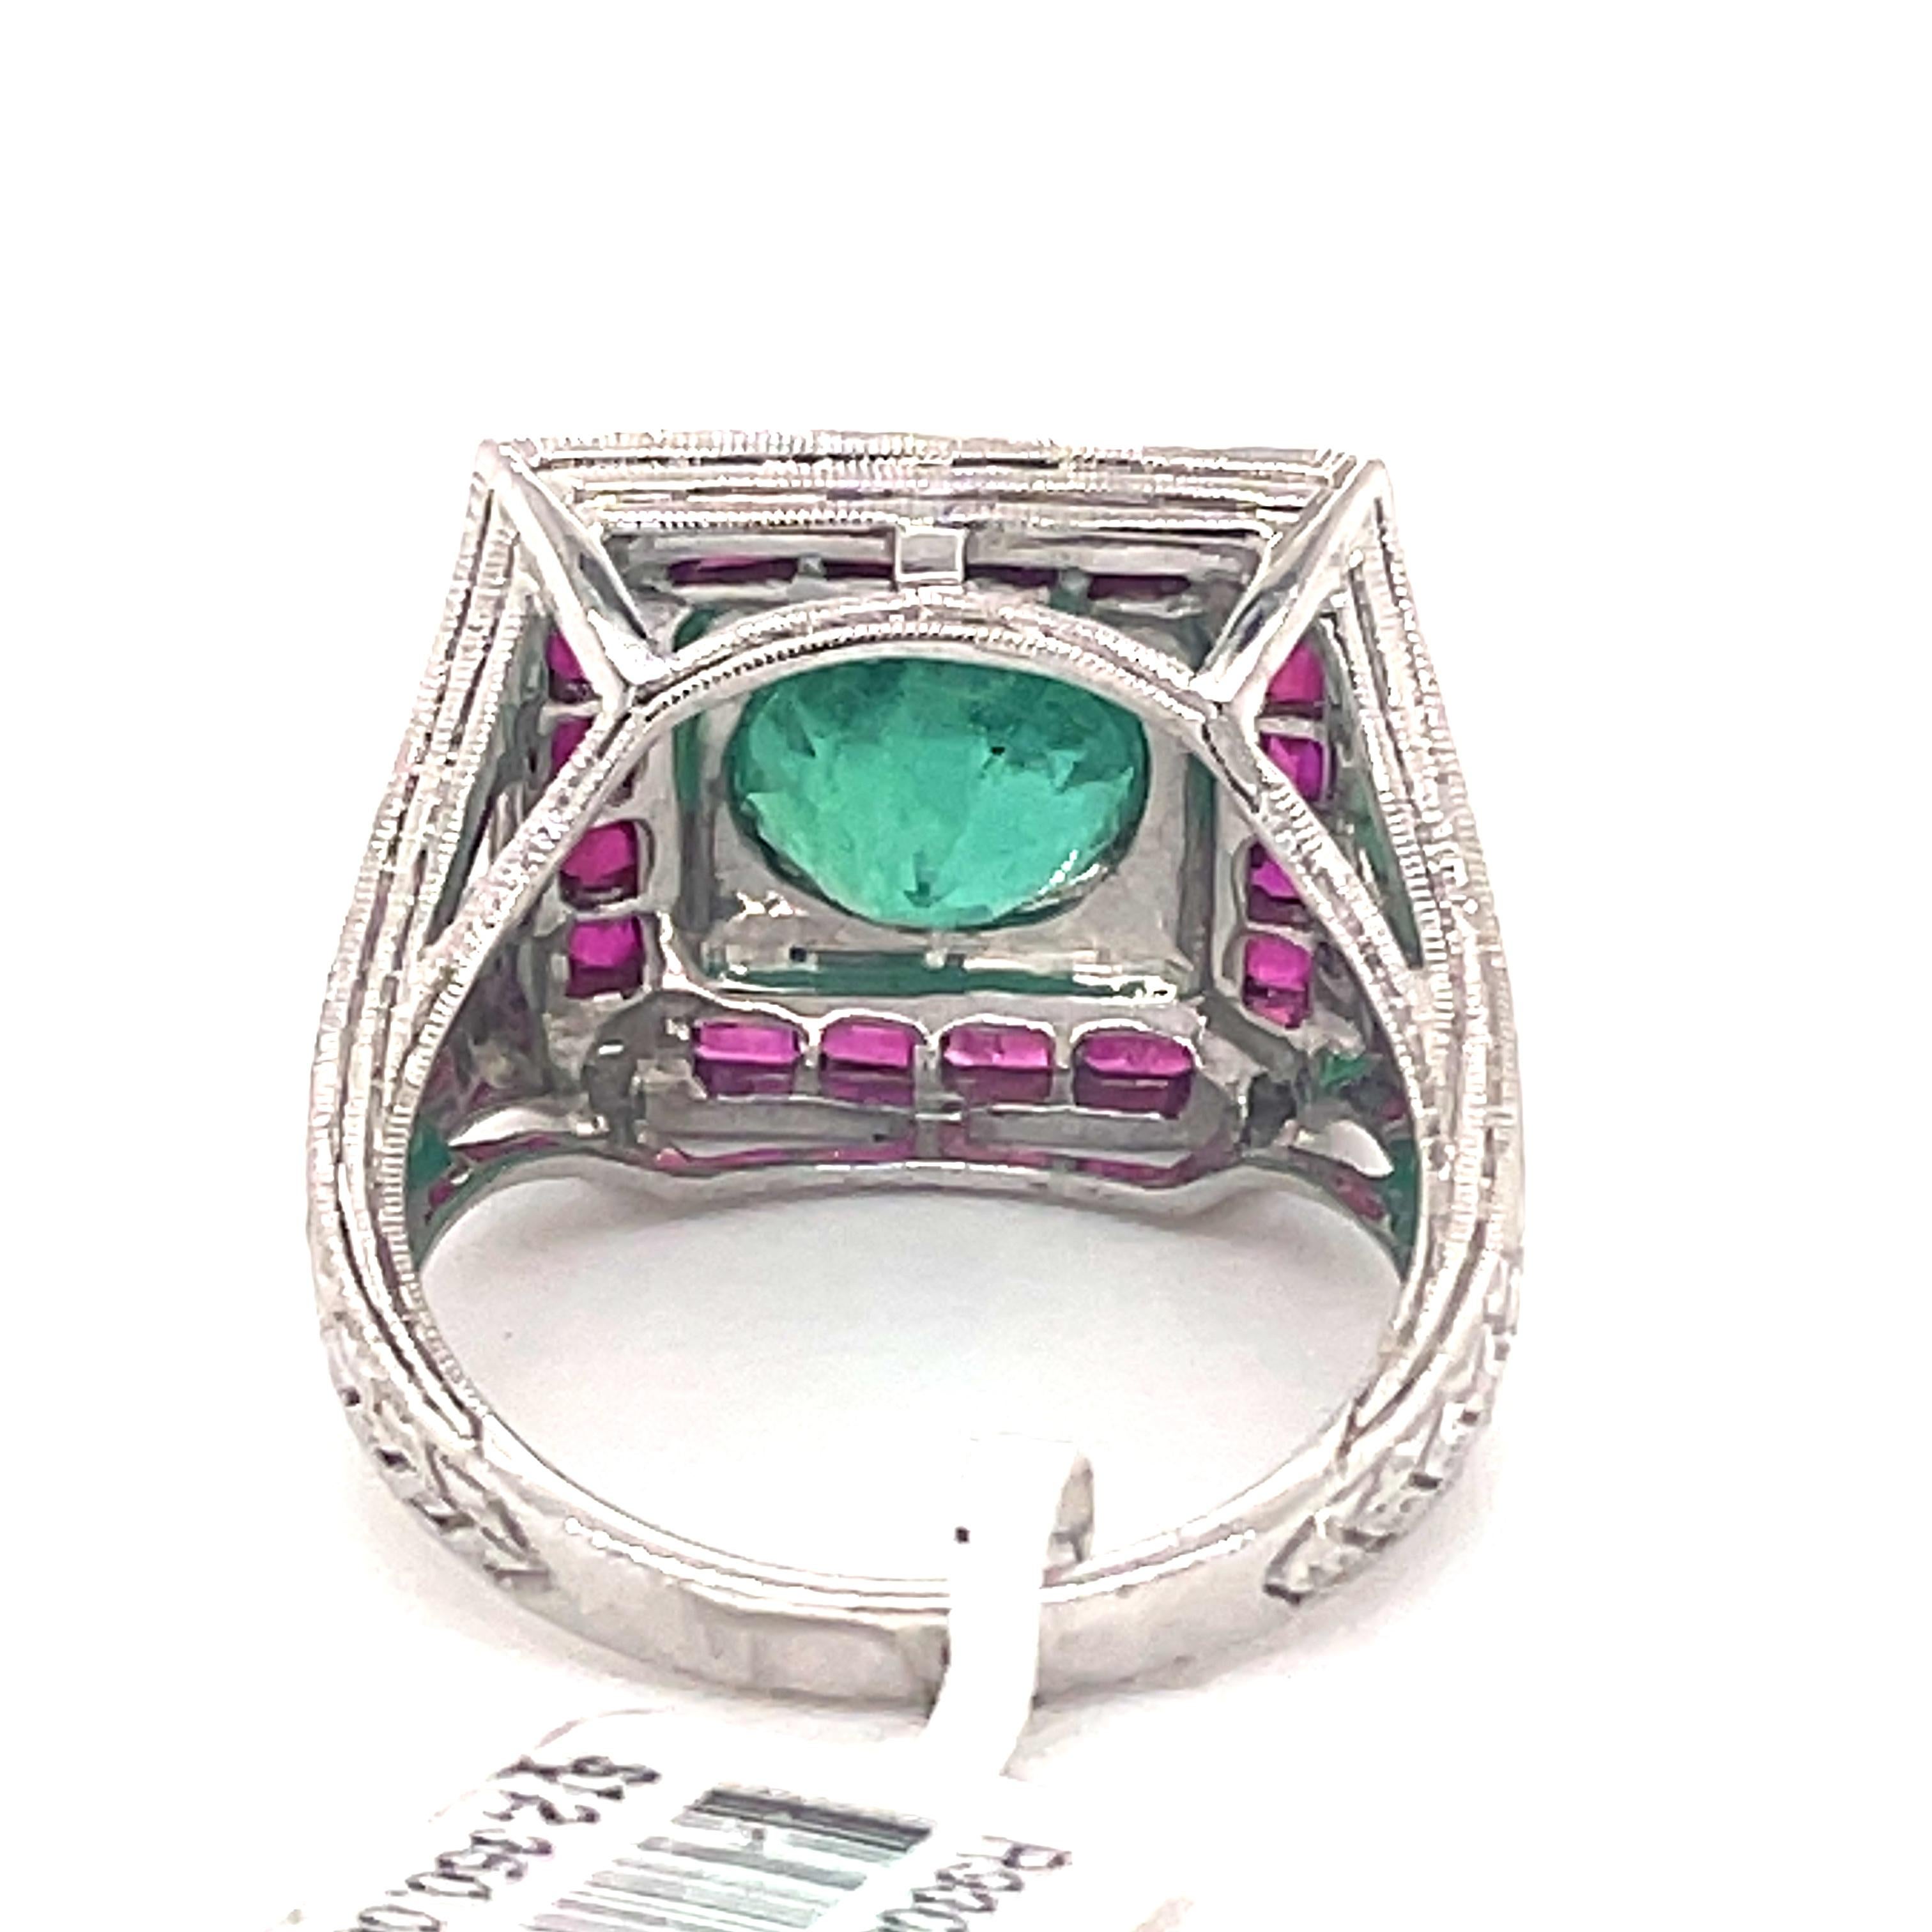 Women's Art Deco Style 2.88 Carat Emerald with Rubies & Diamonds Ring 18k White Gold For Sale